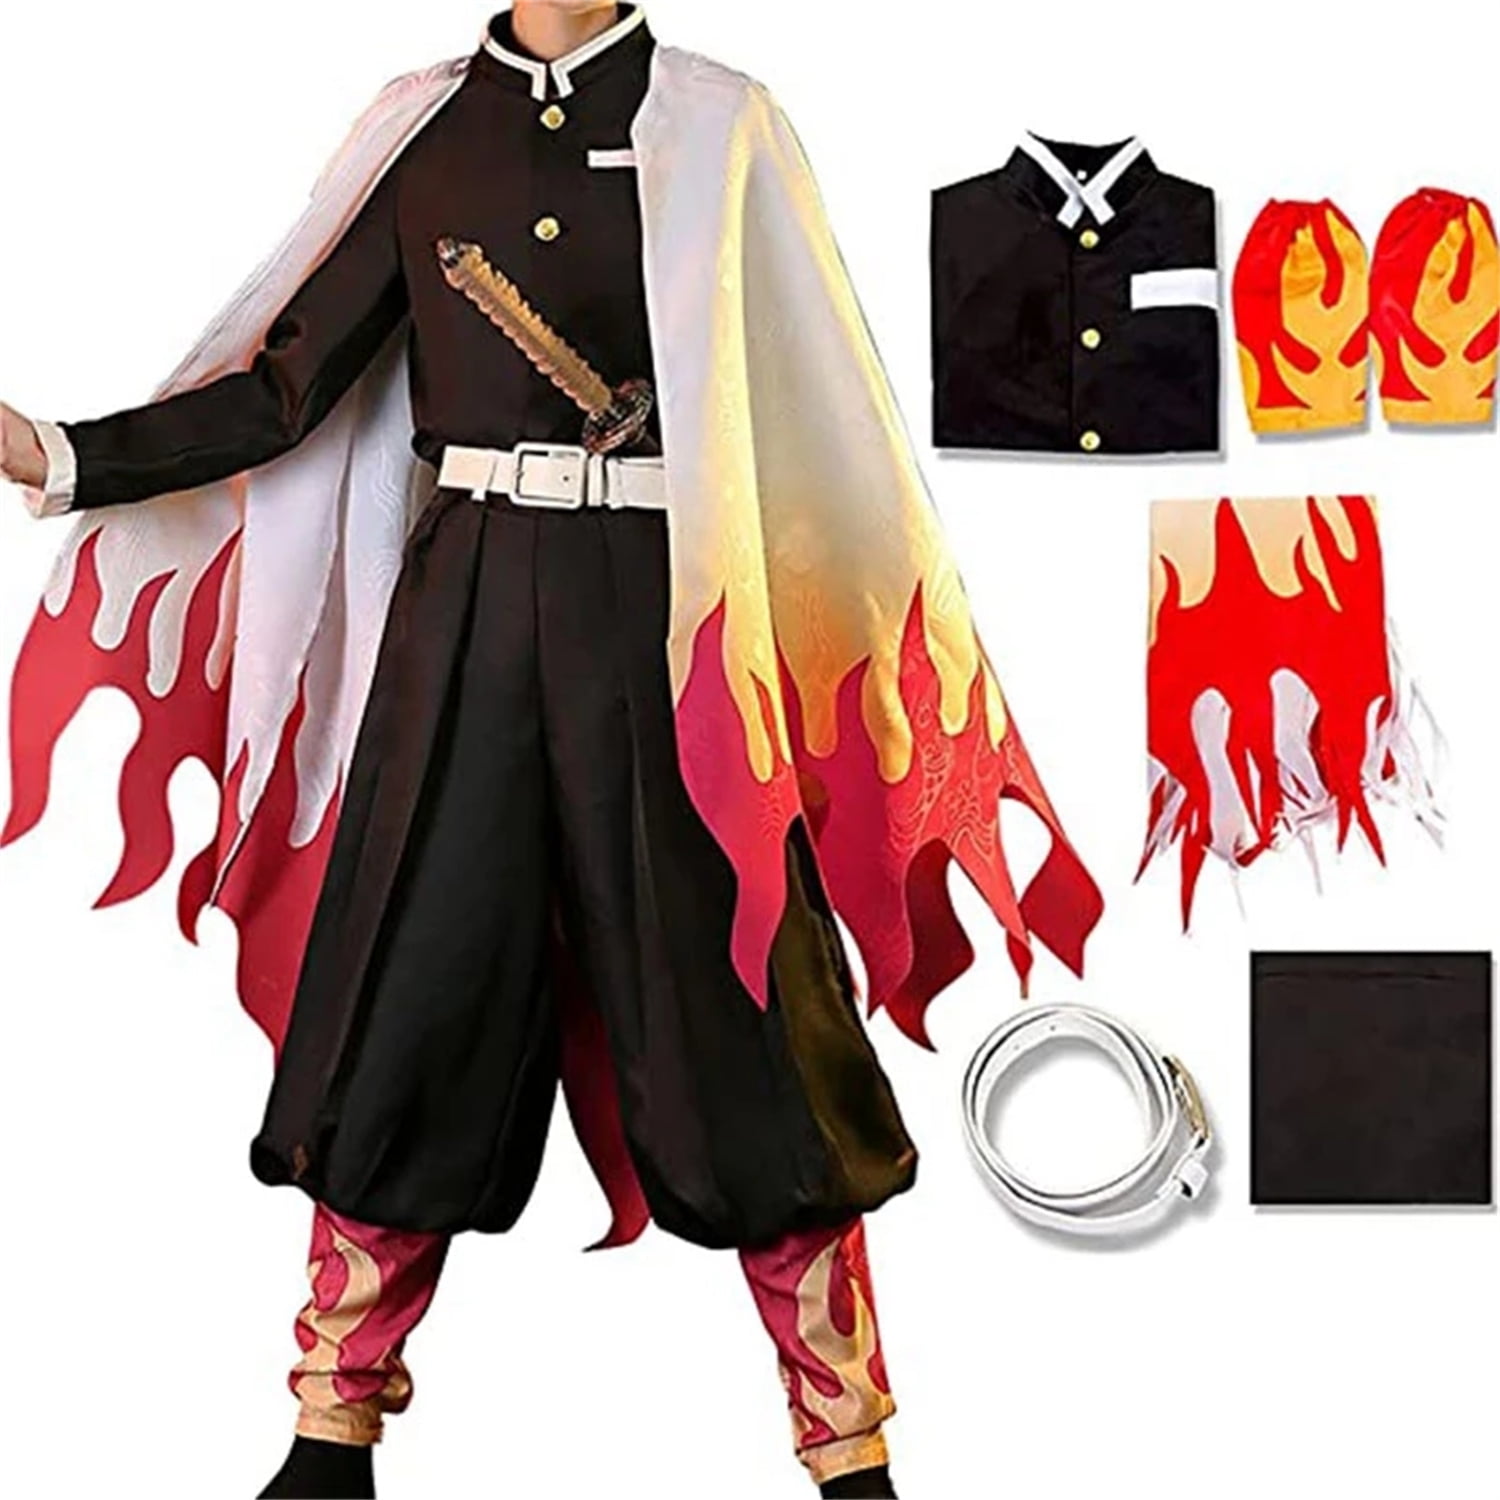 Wholesale Black Butler Sebastian Michaelis cosplay costume uniform  Halloween costumes for Men Anime clothes outfits co From malibabacom